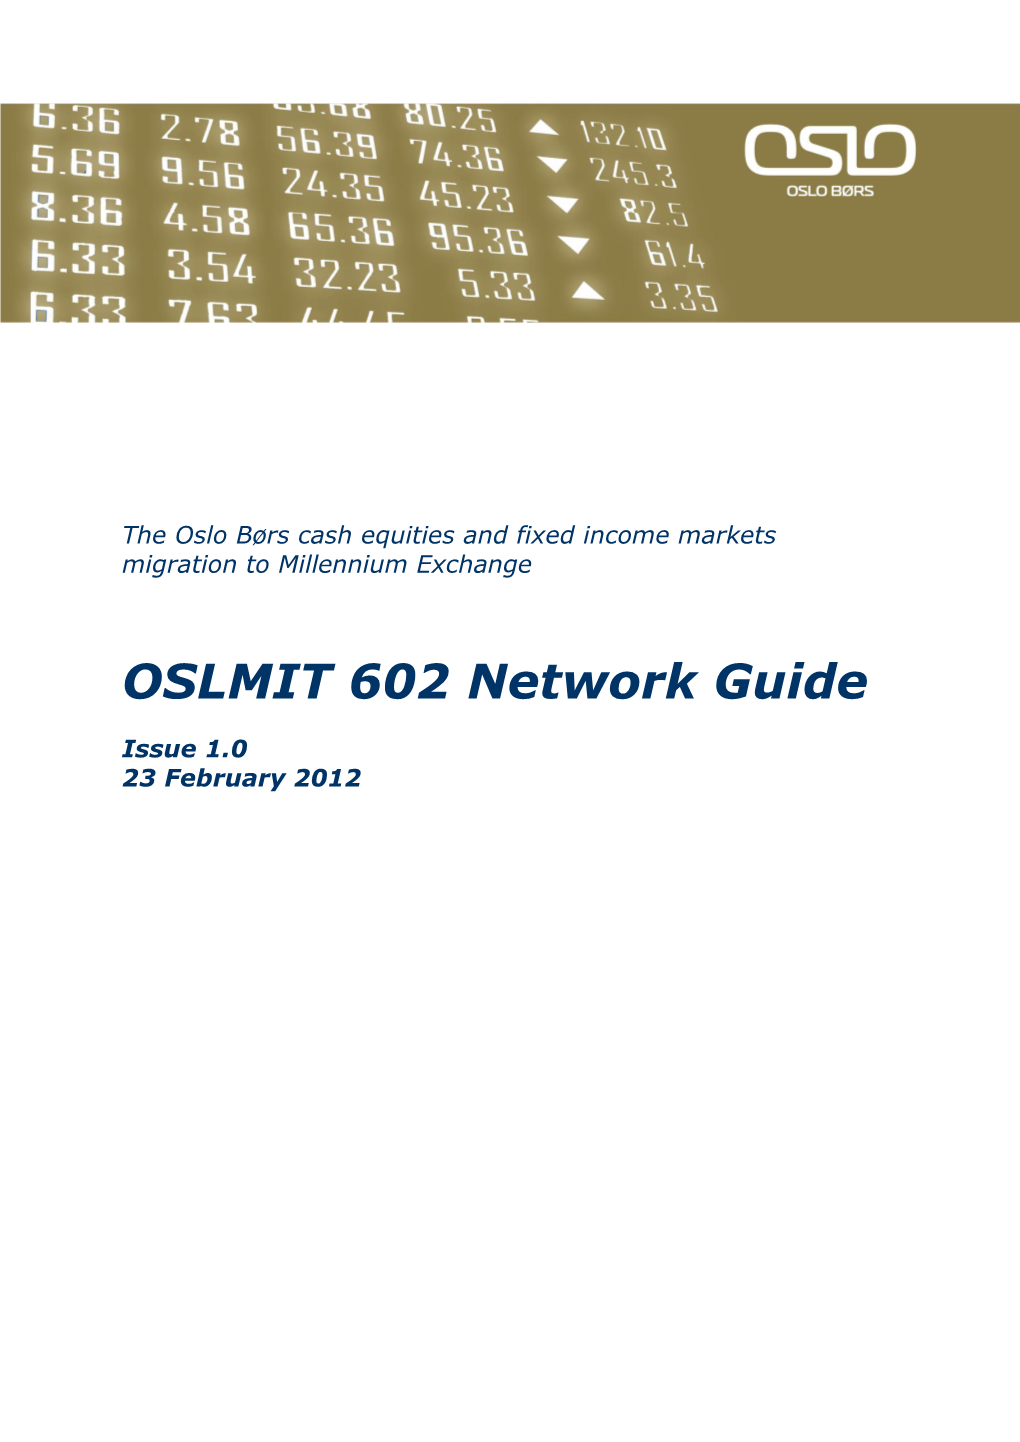 OSLMIT 602 Network Guide